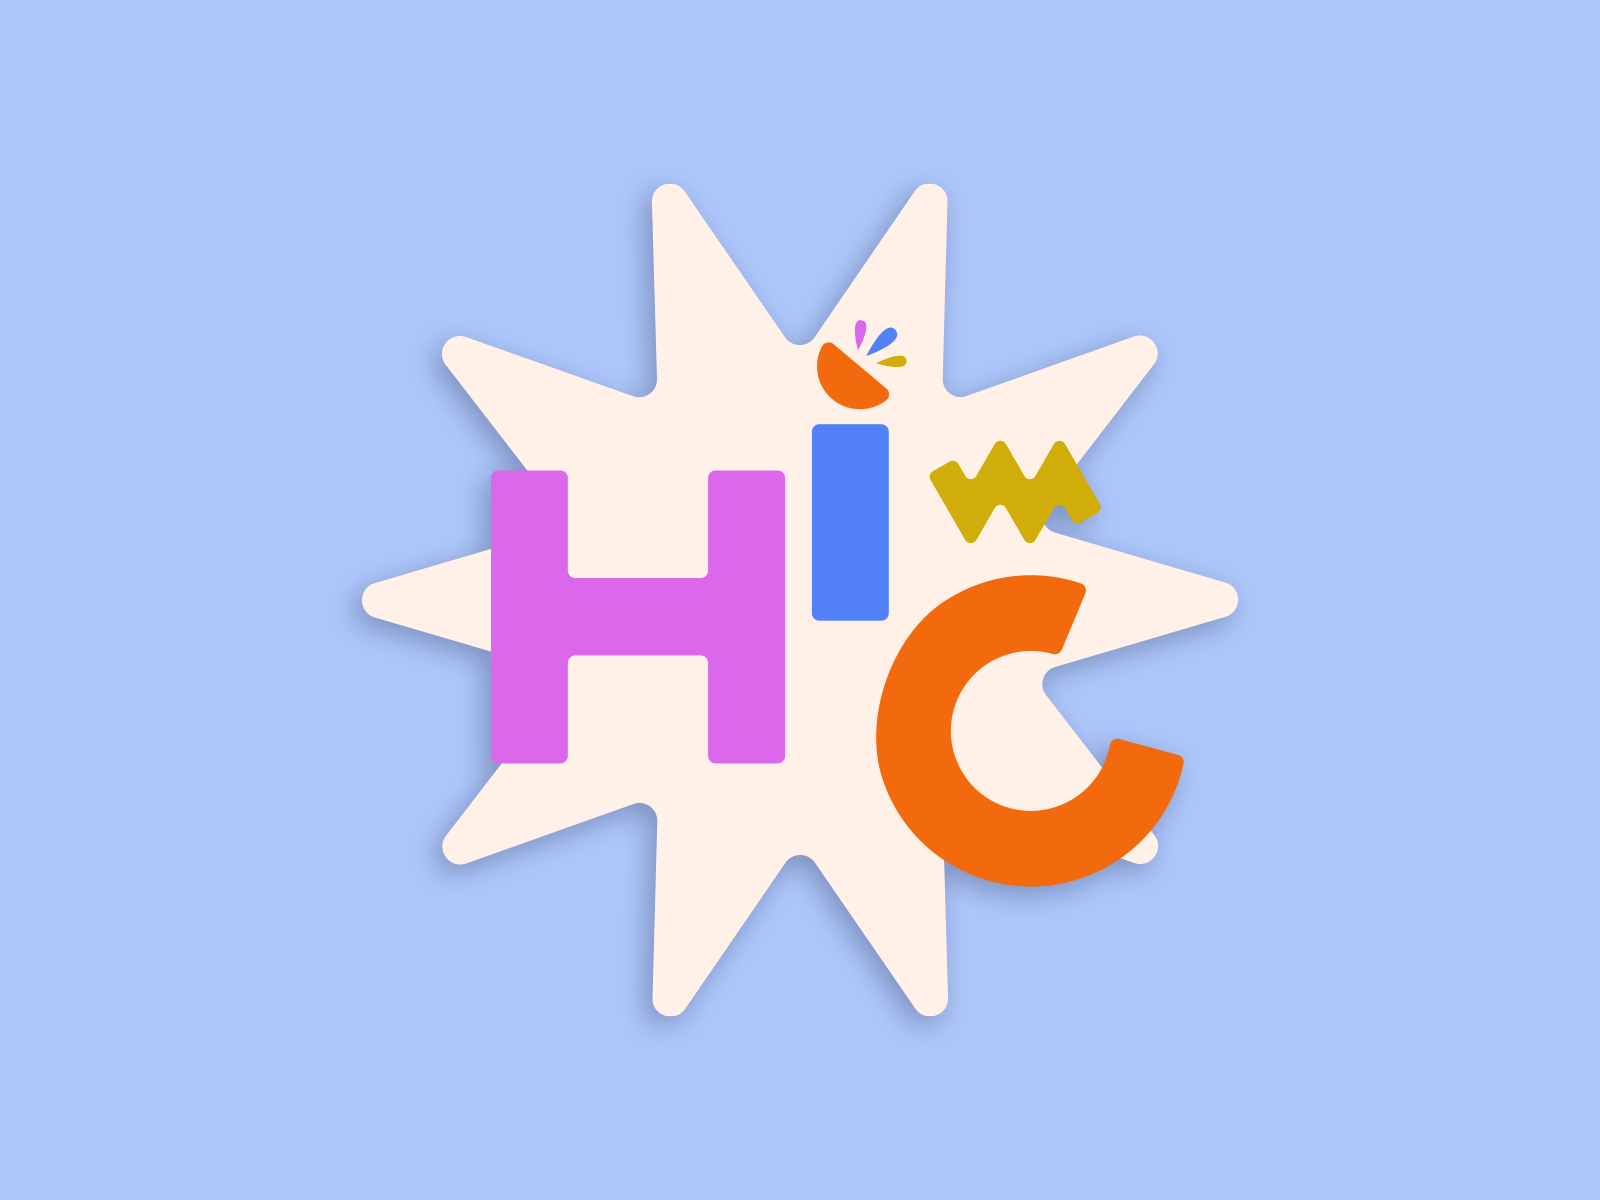 Logo concept for Hi-C by Chandler Jean on Dribbble